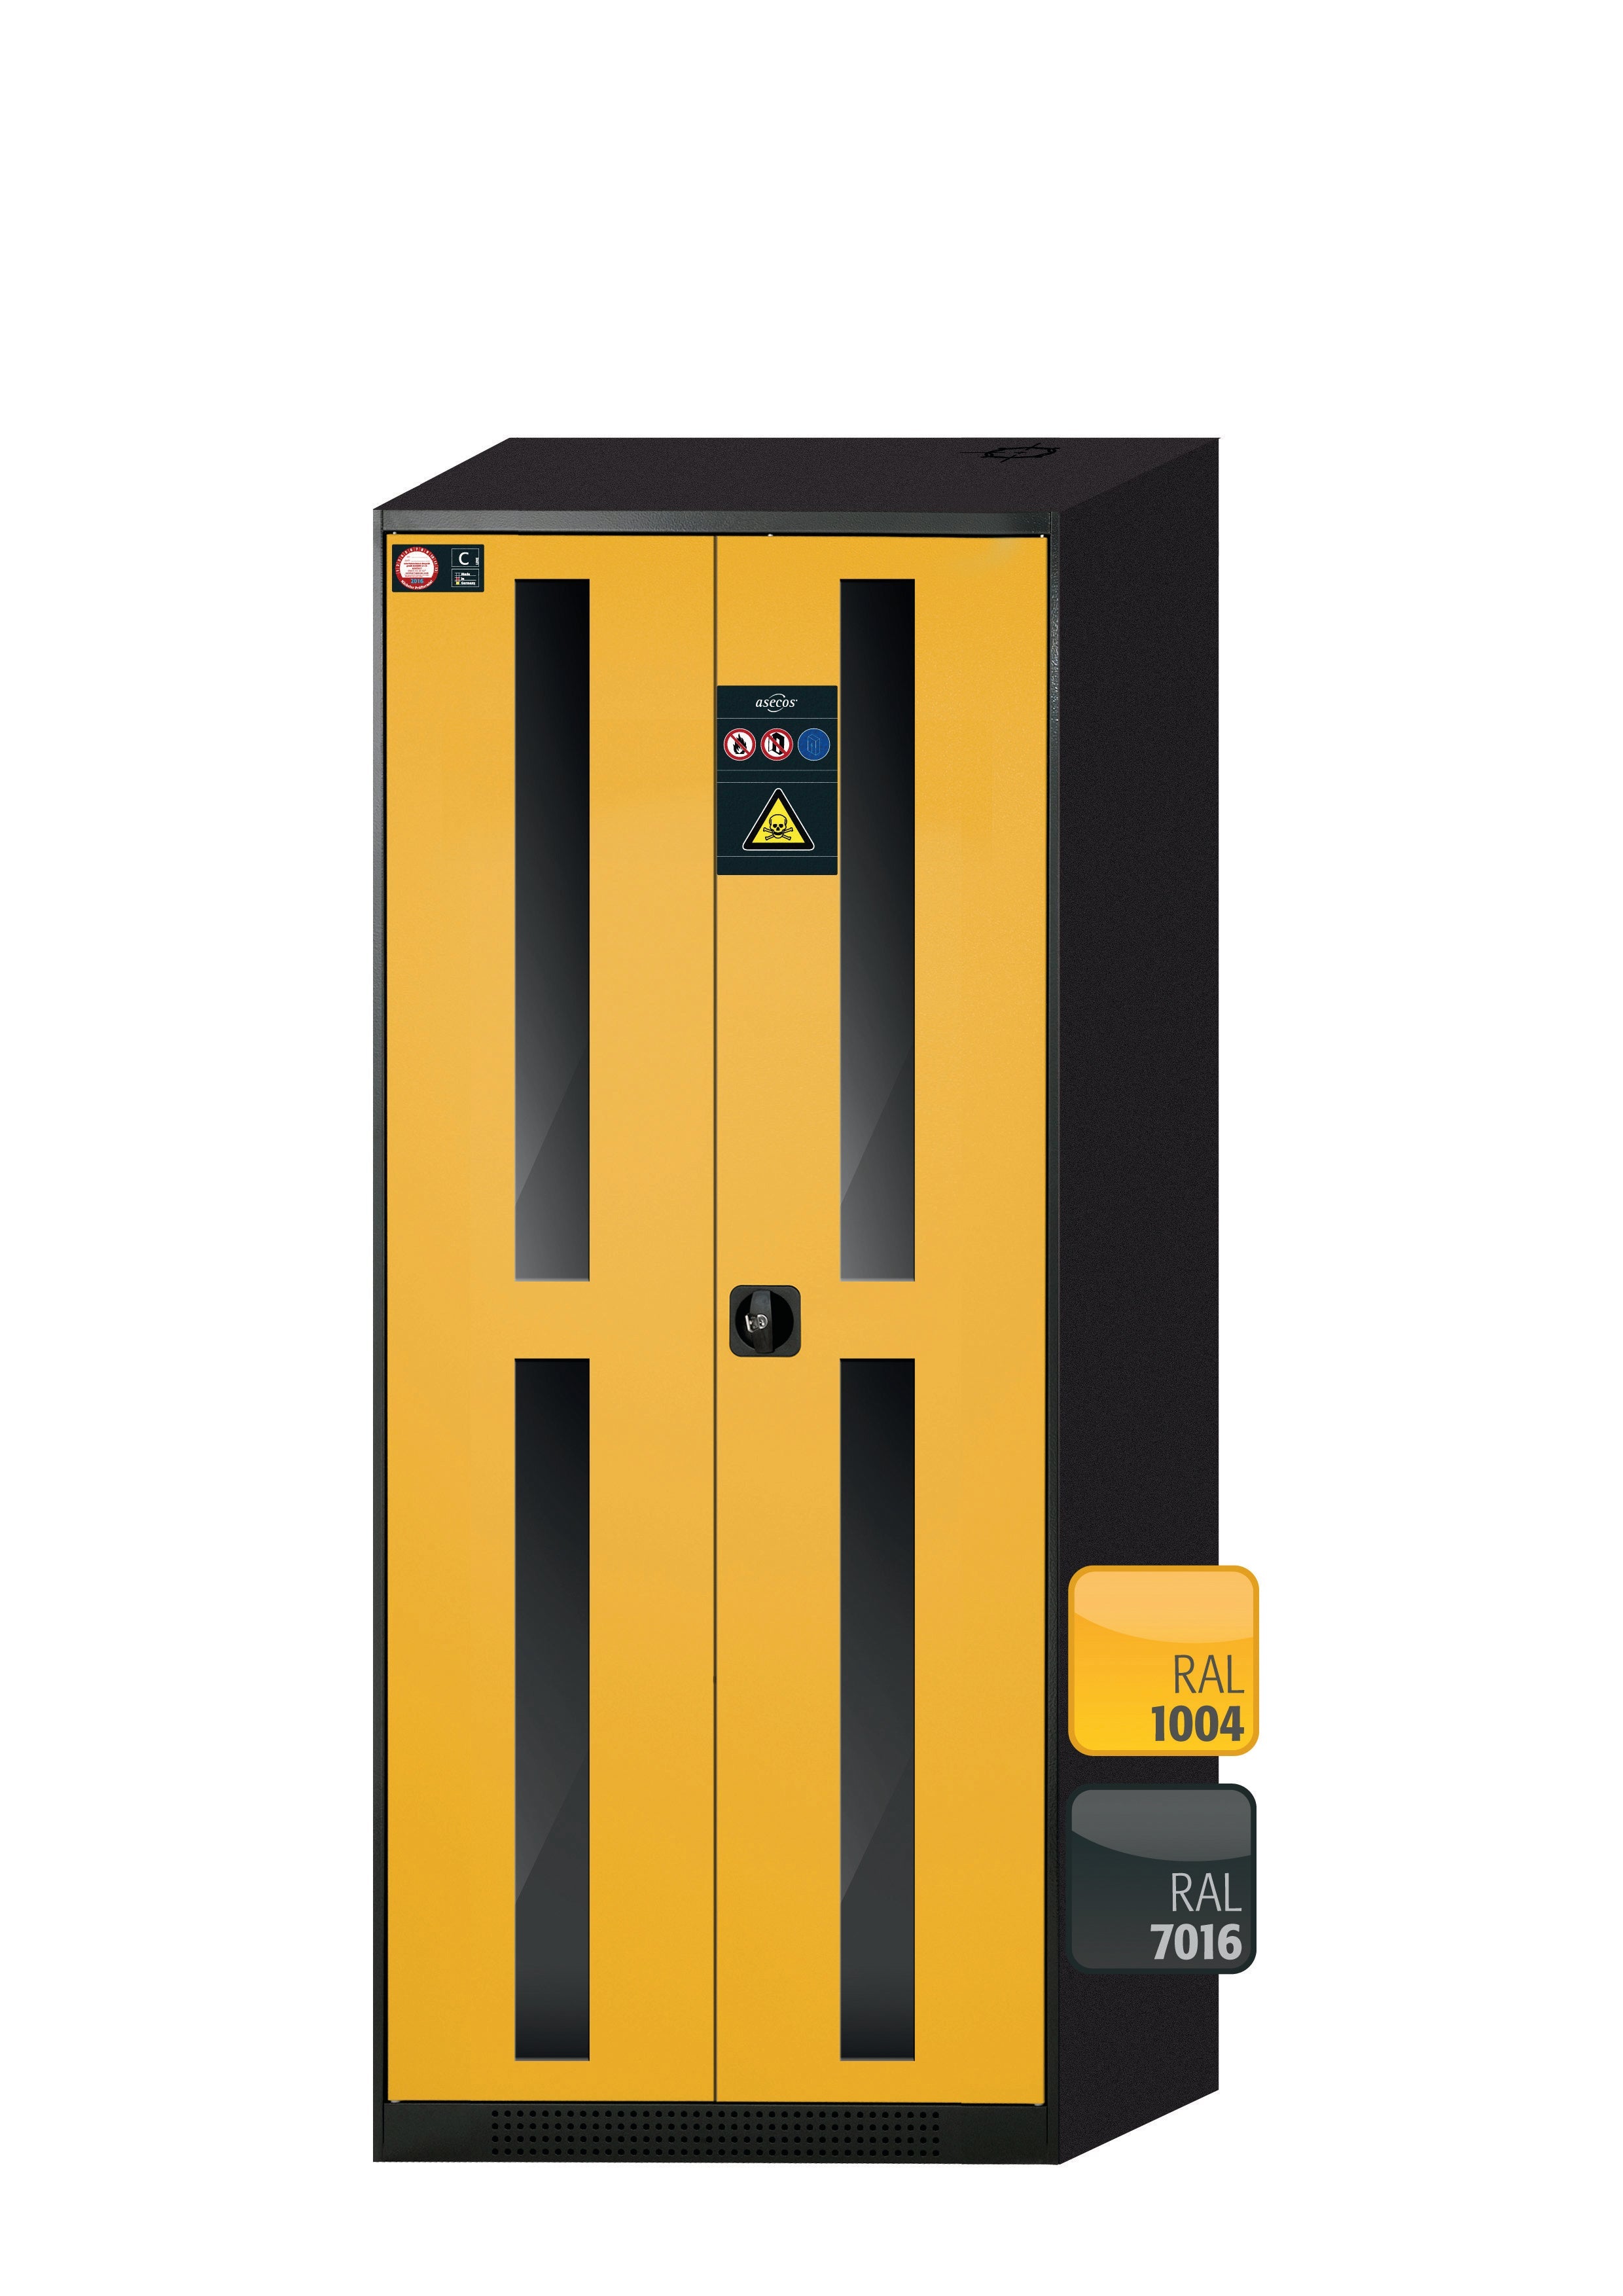 Chemical cabinet CS-CLASSIC-G model CS.195.081.WDFW in safety yellow RAL 1004 with 3x standard shelves (sheet steel)